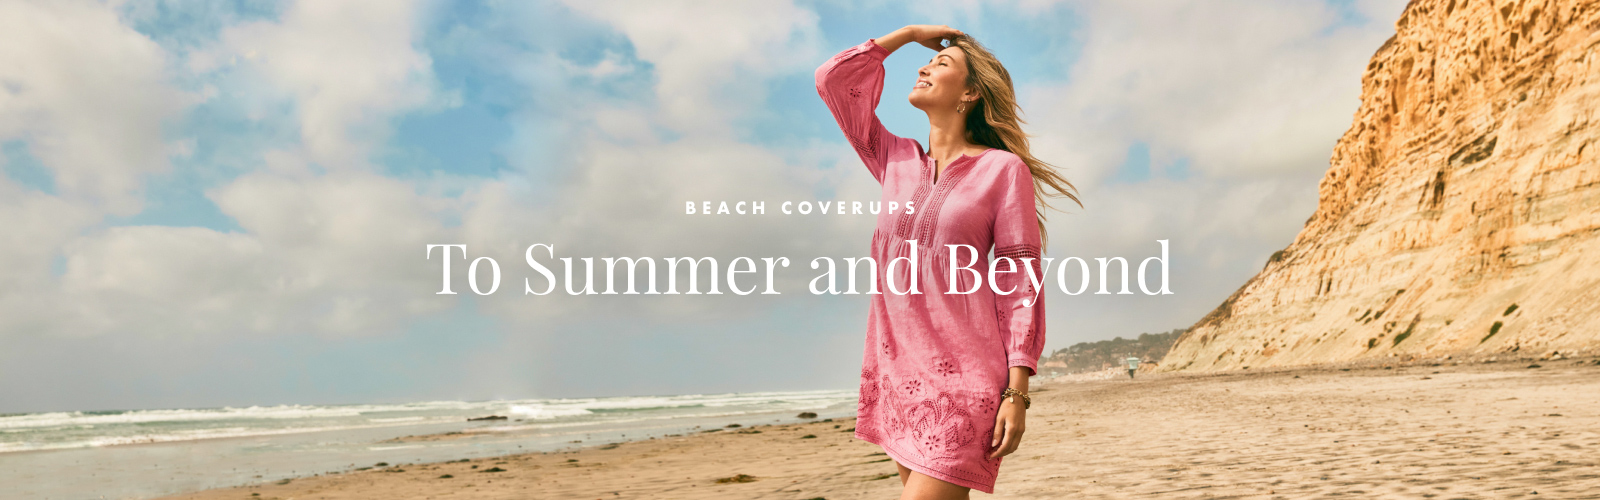 Beach Coverups - To Summer and Beyond